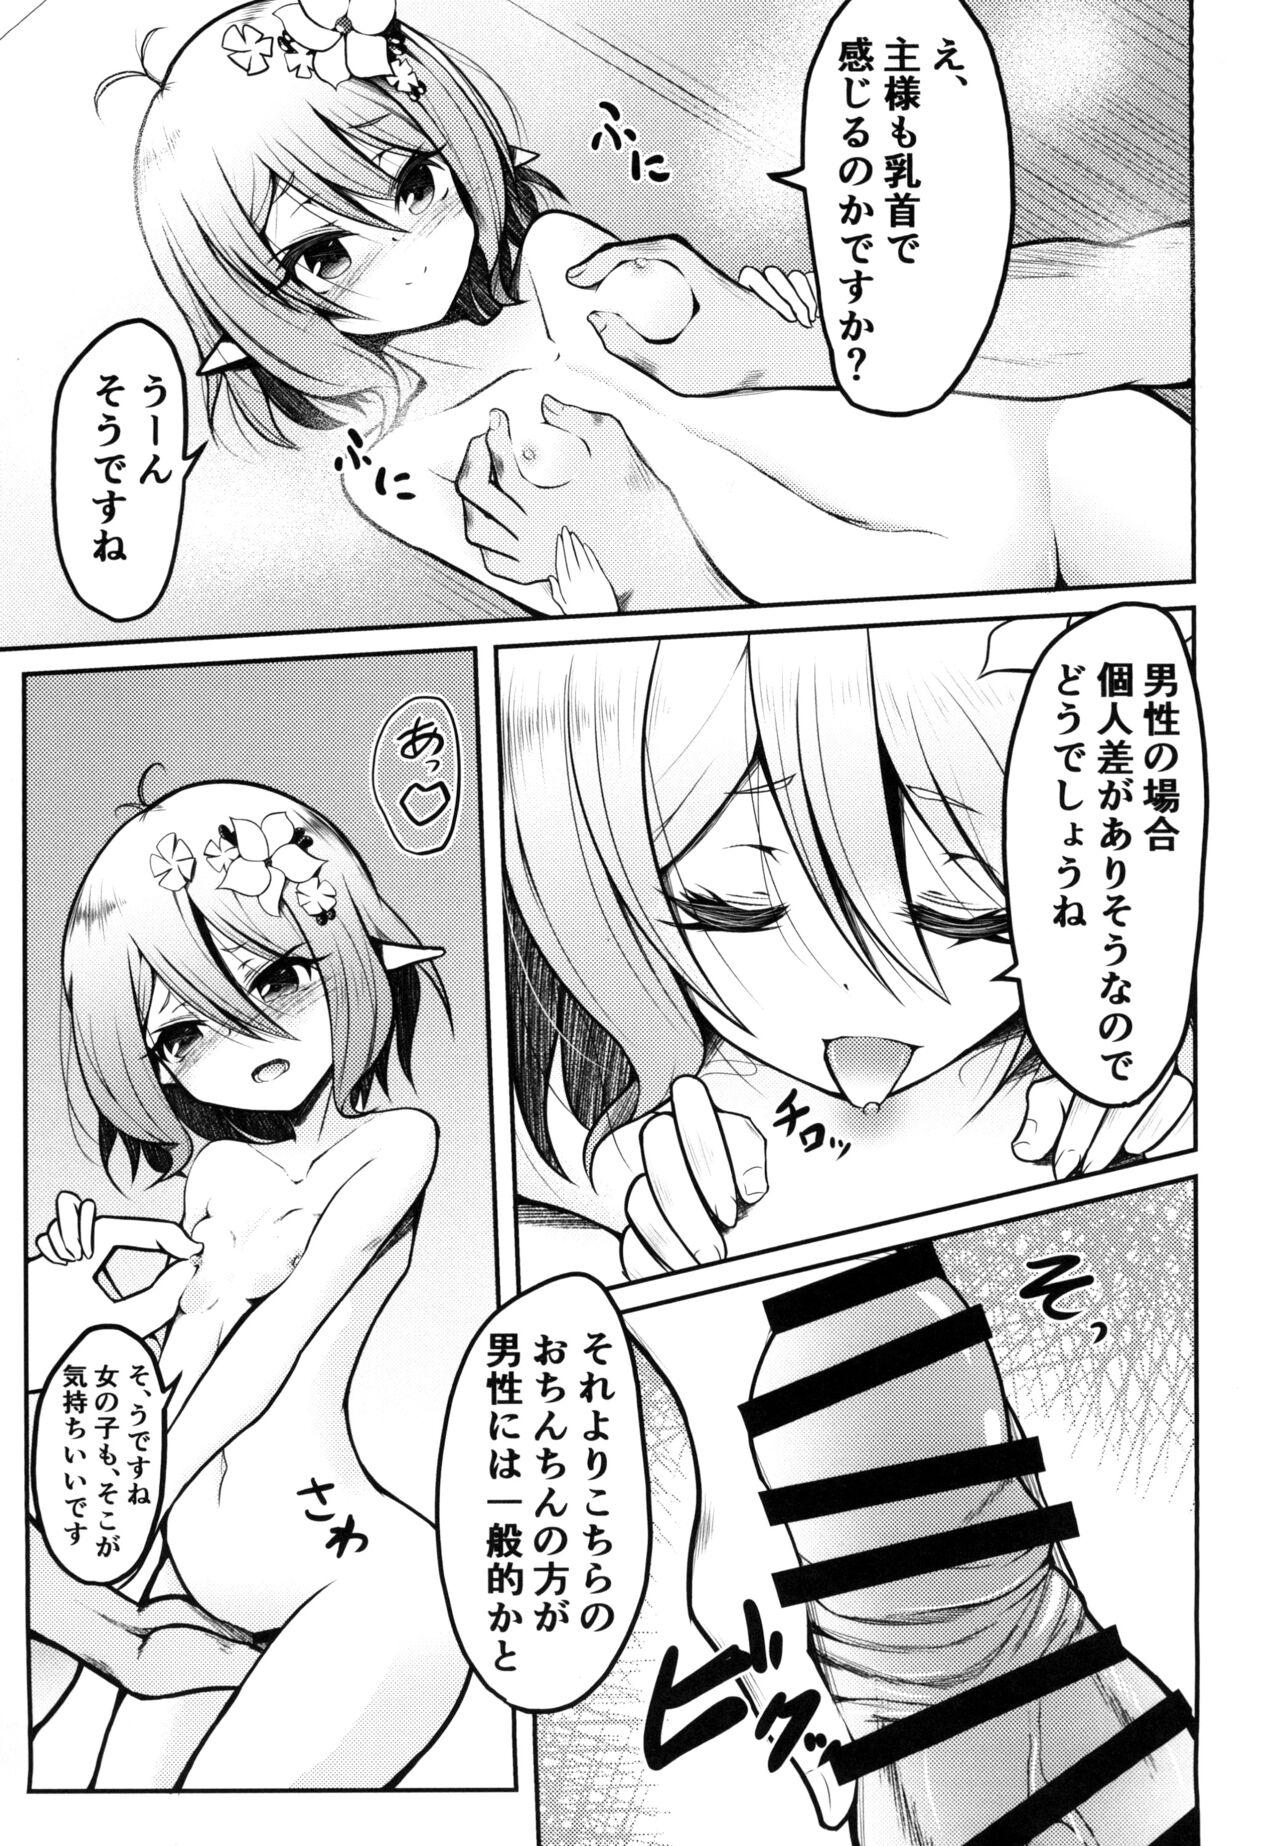 Master おべんきょしましょう主様!! - Princess connect Stripping - Page 7